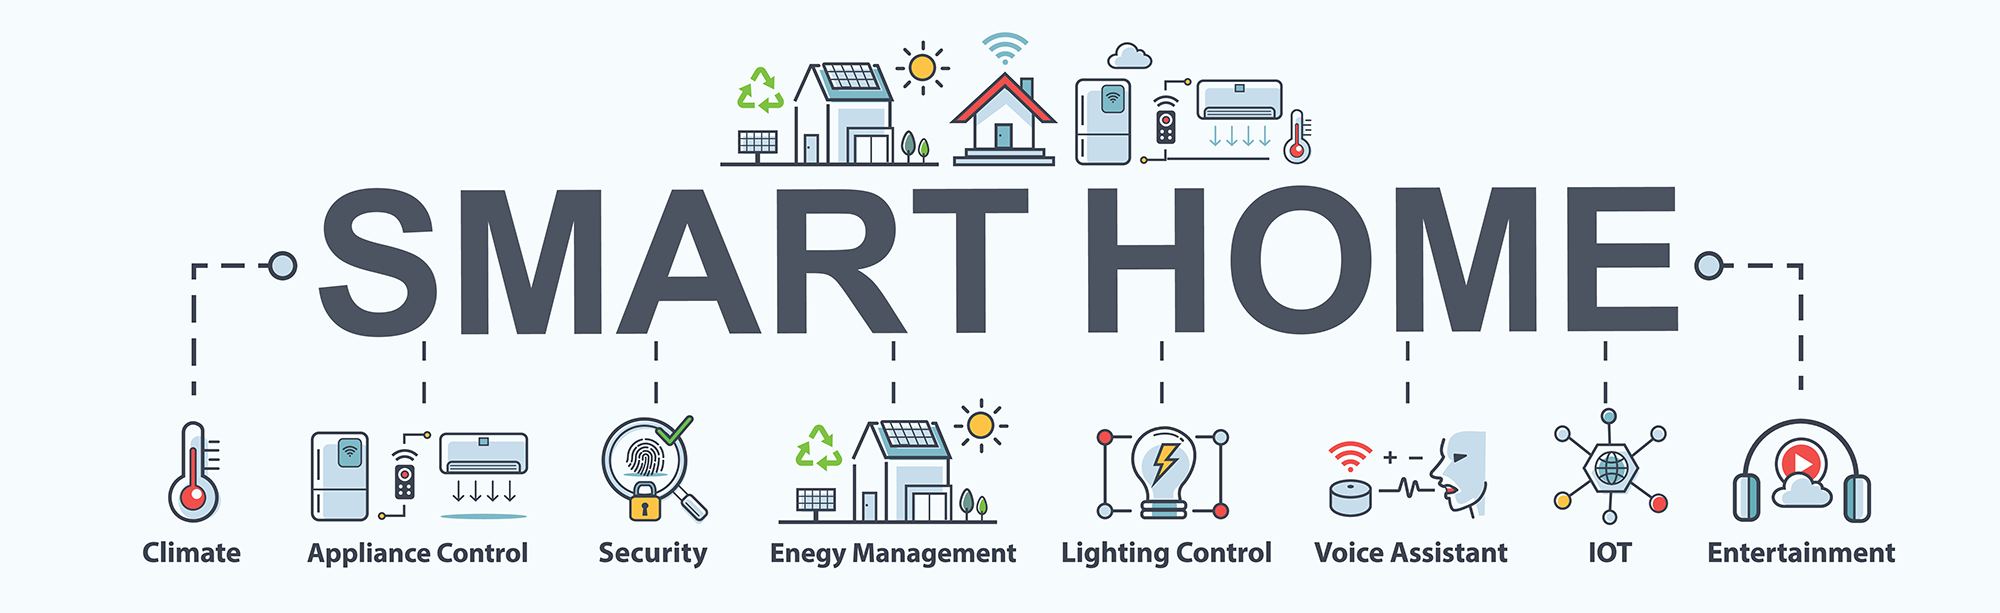 HVAC and the IoT (Internet of Things)